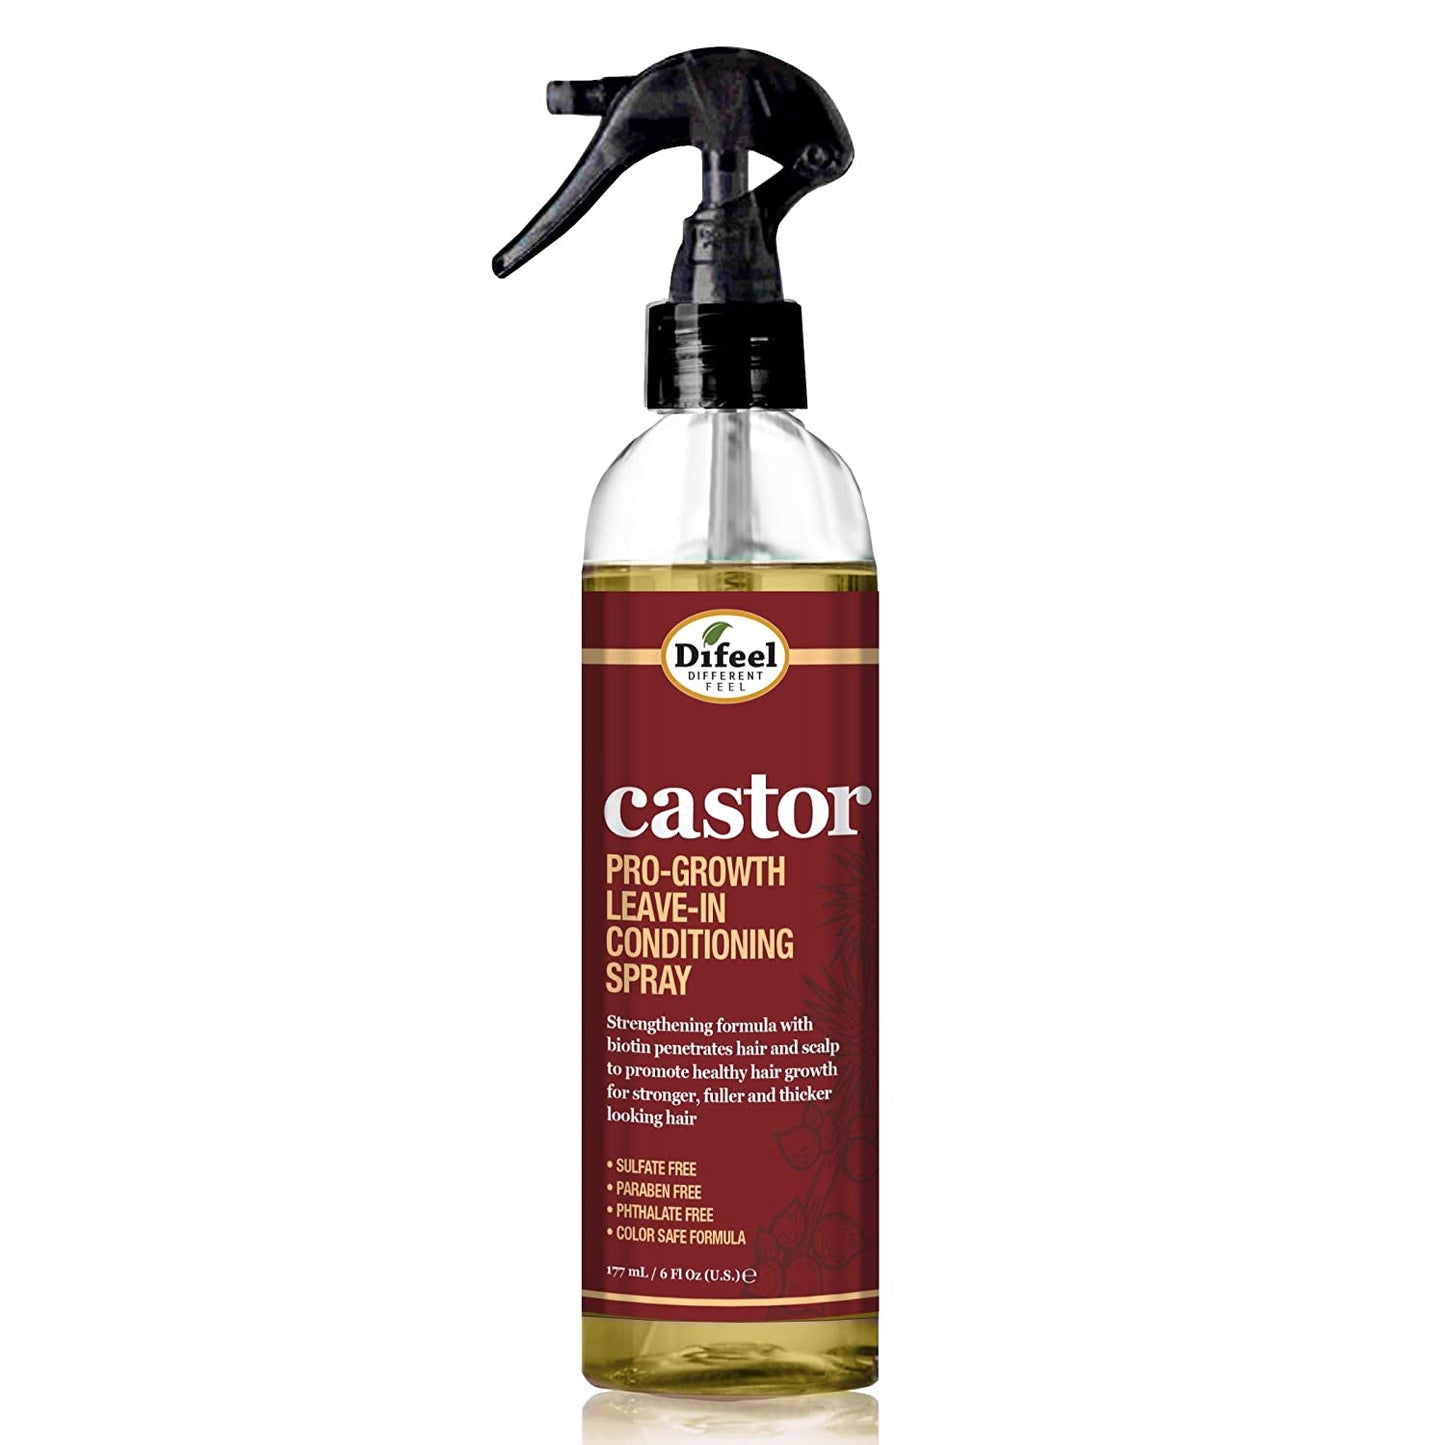 Difeel Castor Pro Growth Leave In Conditioning Spray - 177ml